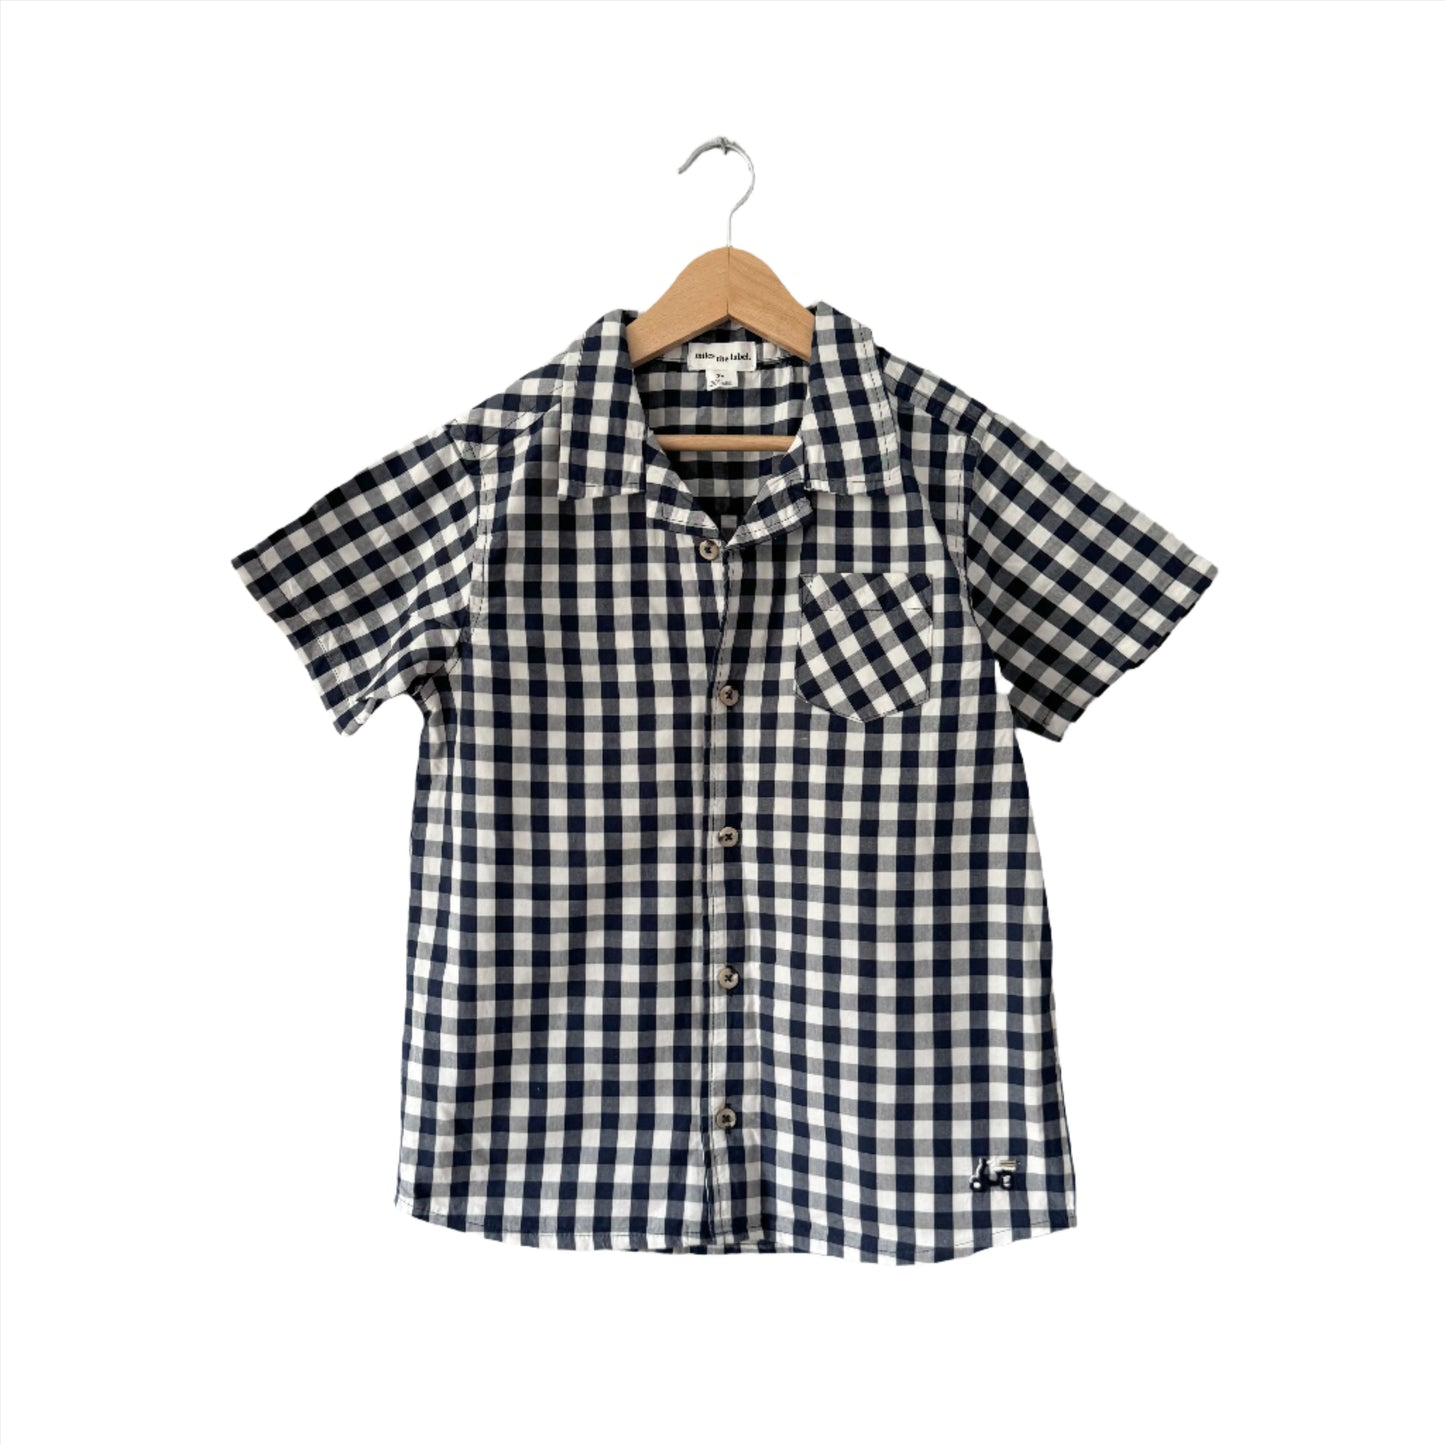 Miles the label / White x navy gingham shirt / 7Y